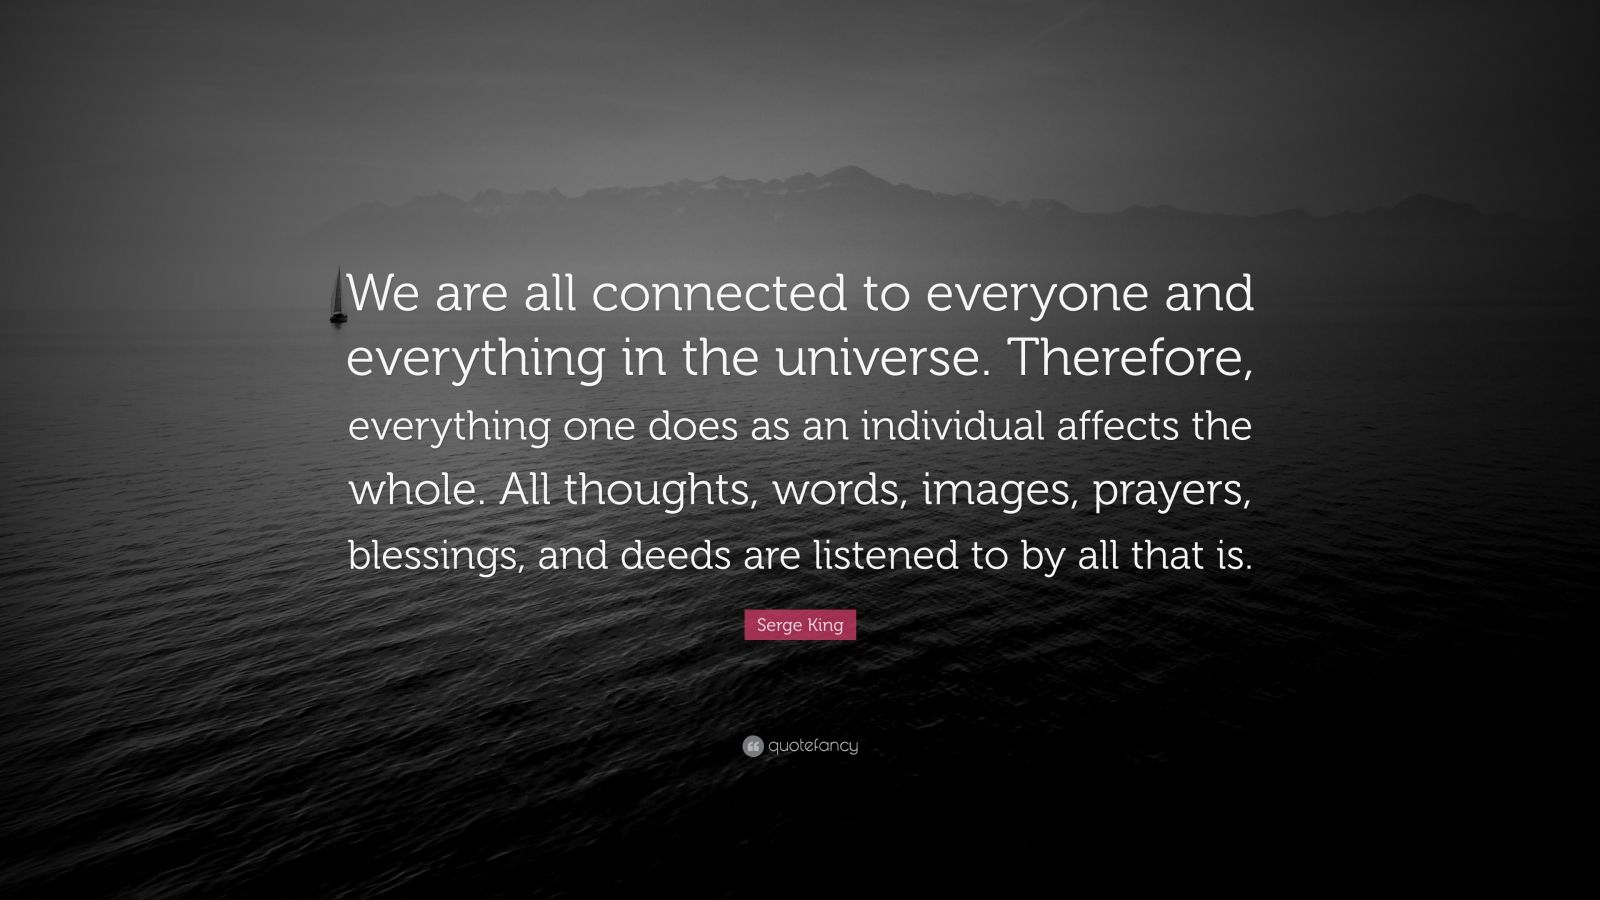 Serge King Quote: “We are all connected to everyone and everything in